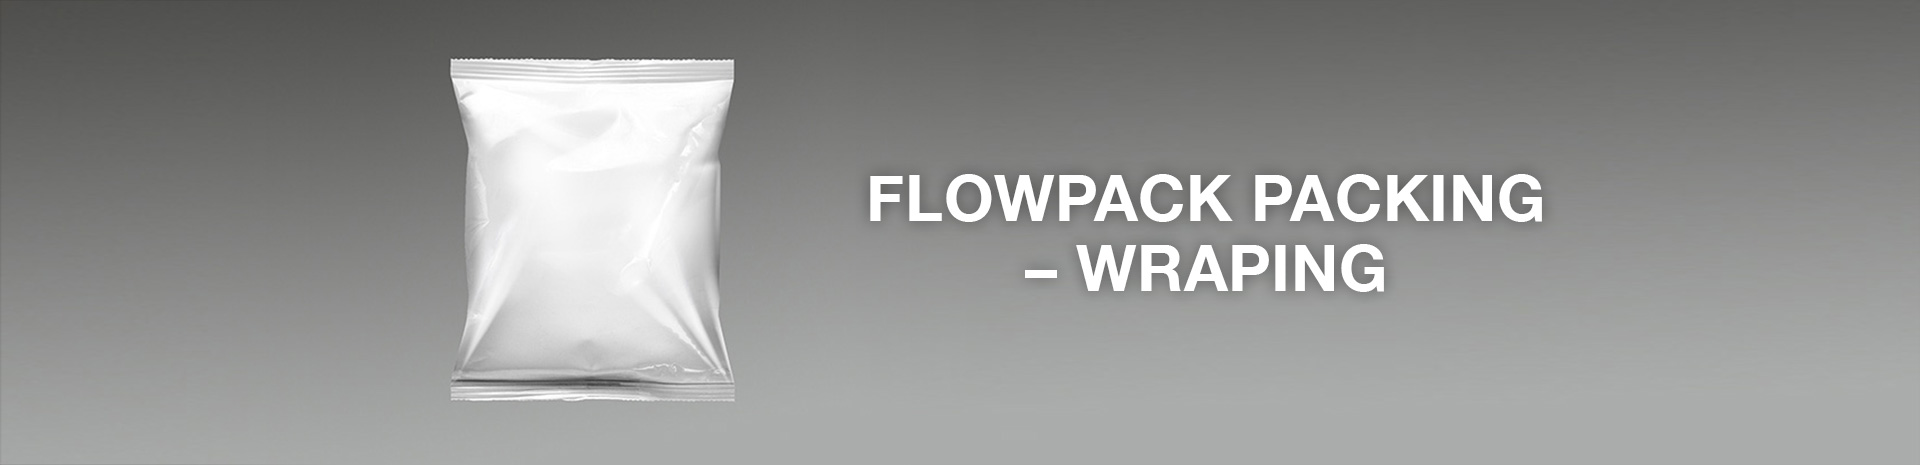 Flowpack packing – wraping